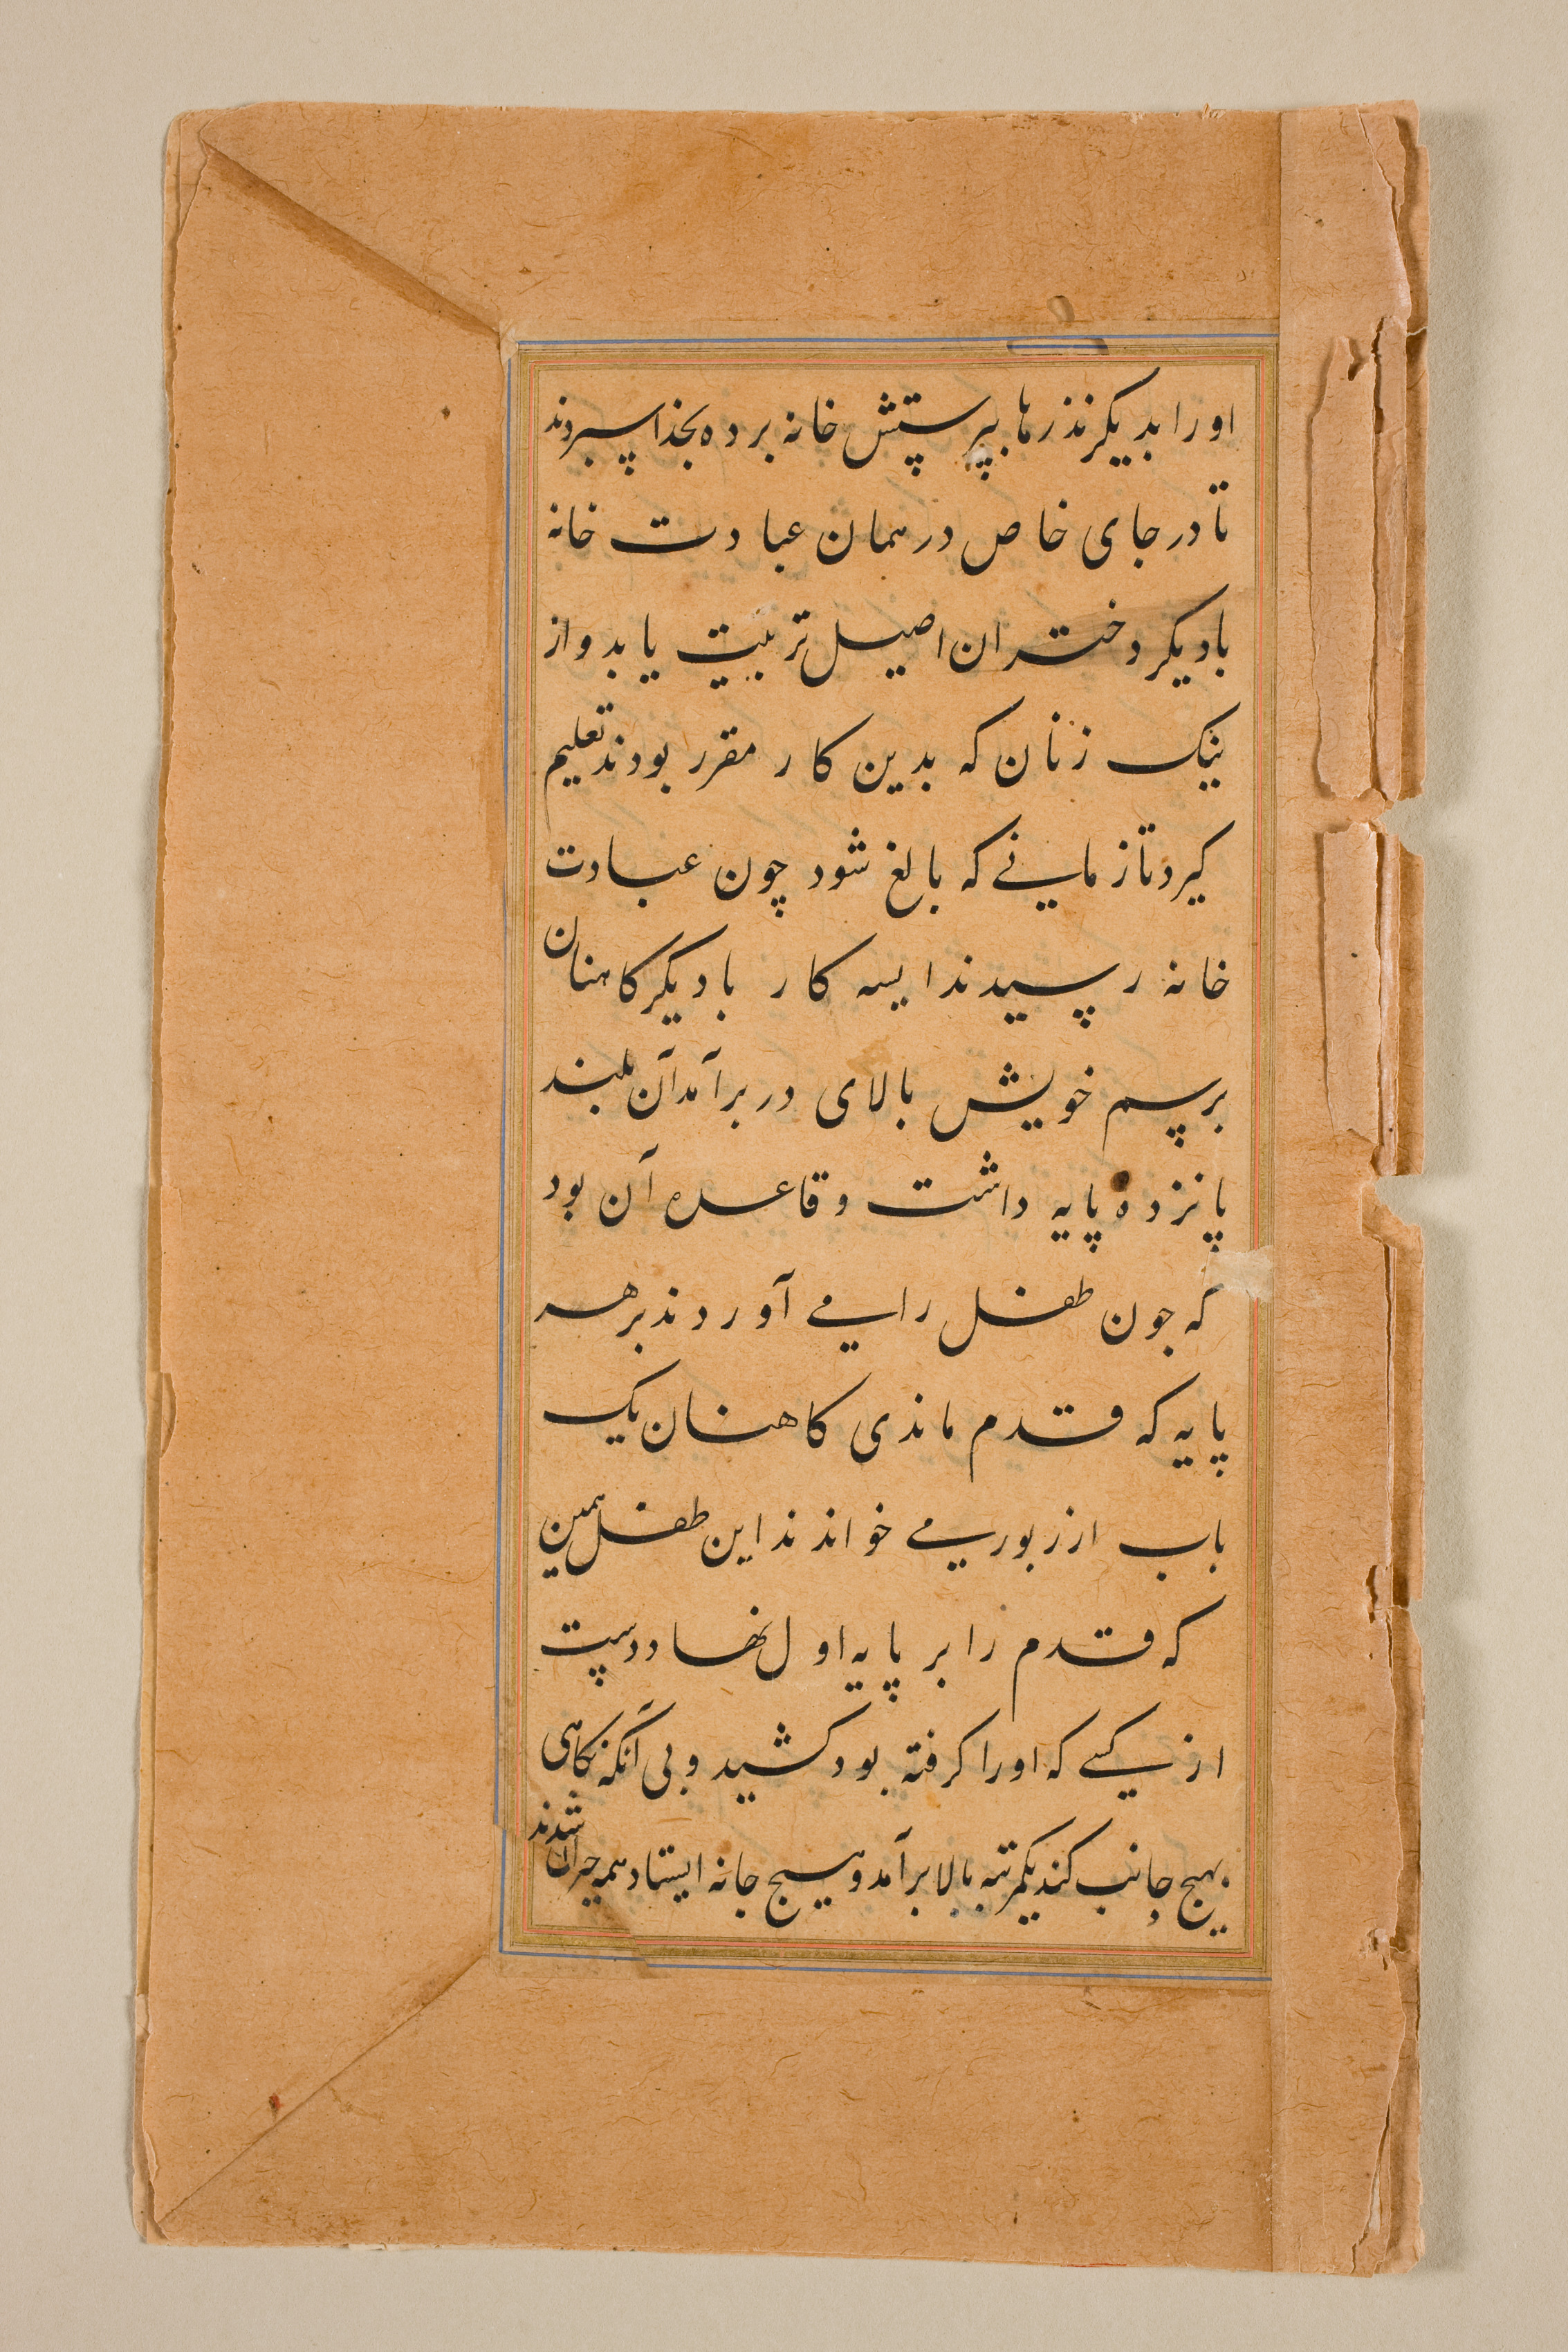 Text, Folio 8 (recto), from a Mirror of Holiness (Mir’at al-quds) of Father Jerome Xavier